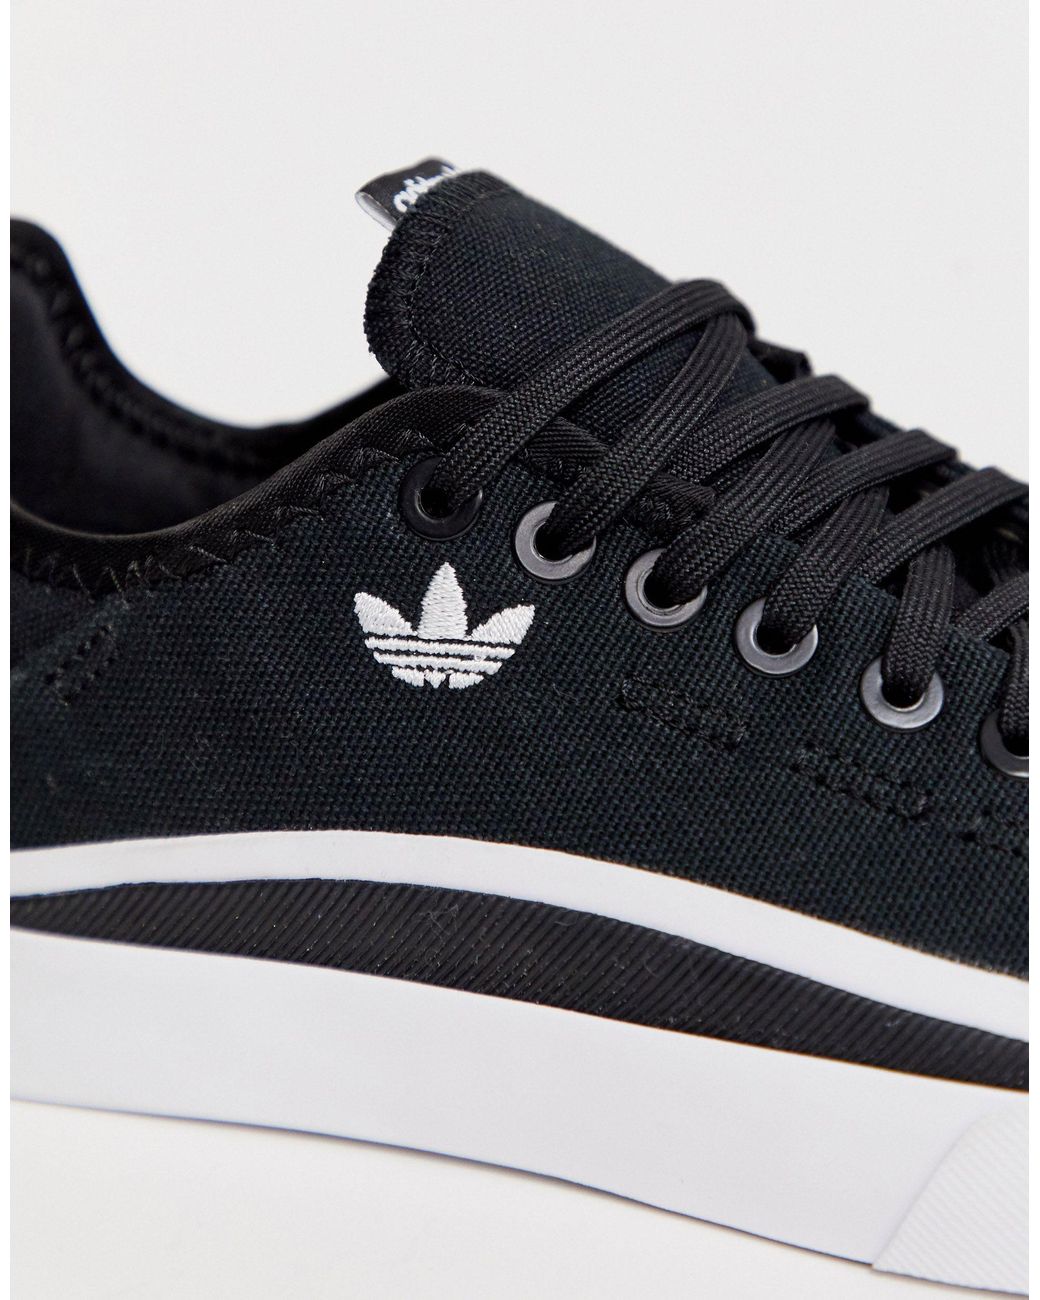 adidas Originals Rubber Sabalo Trainer In Black And White | Lyst